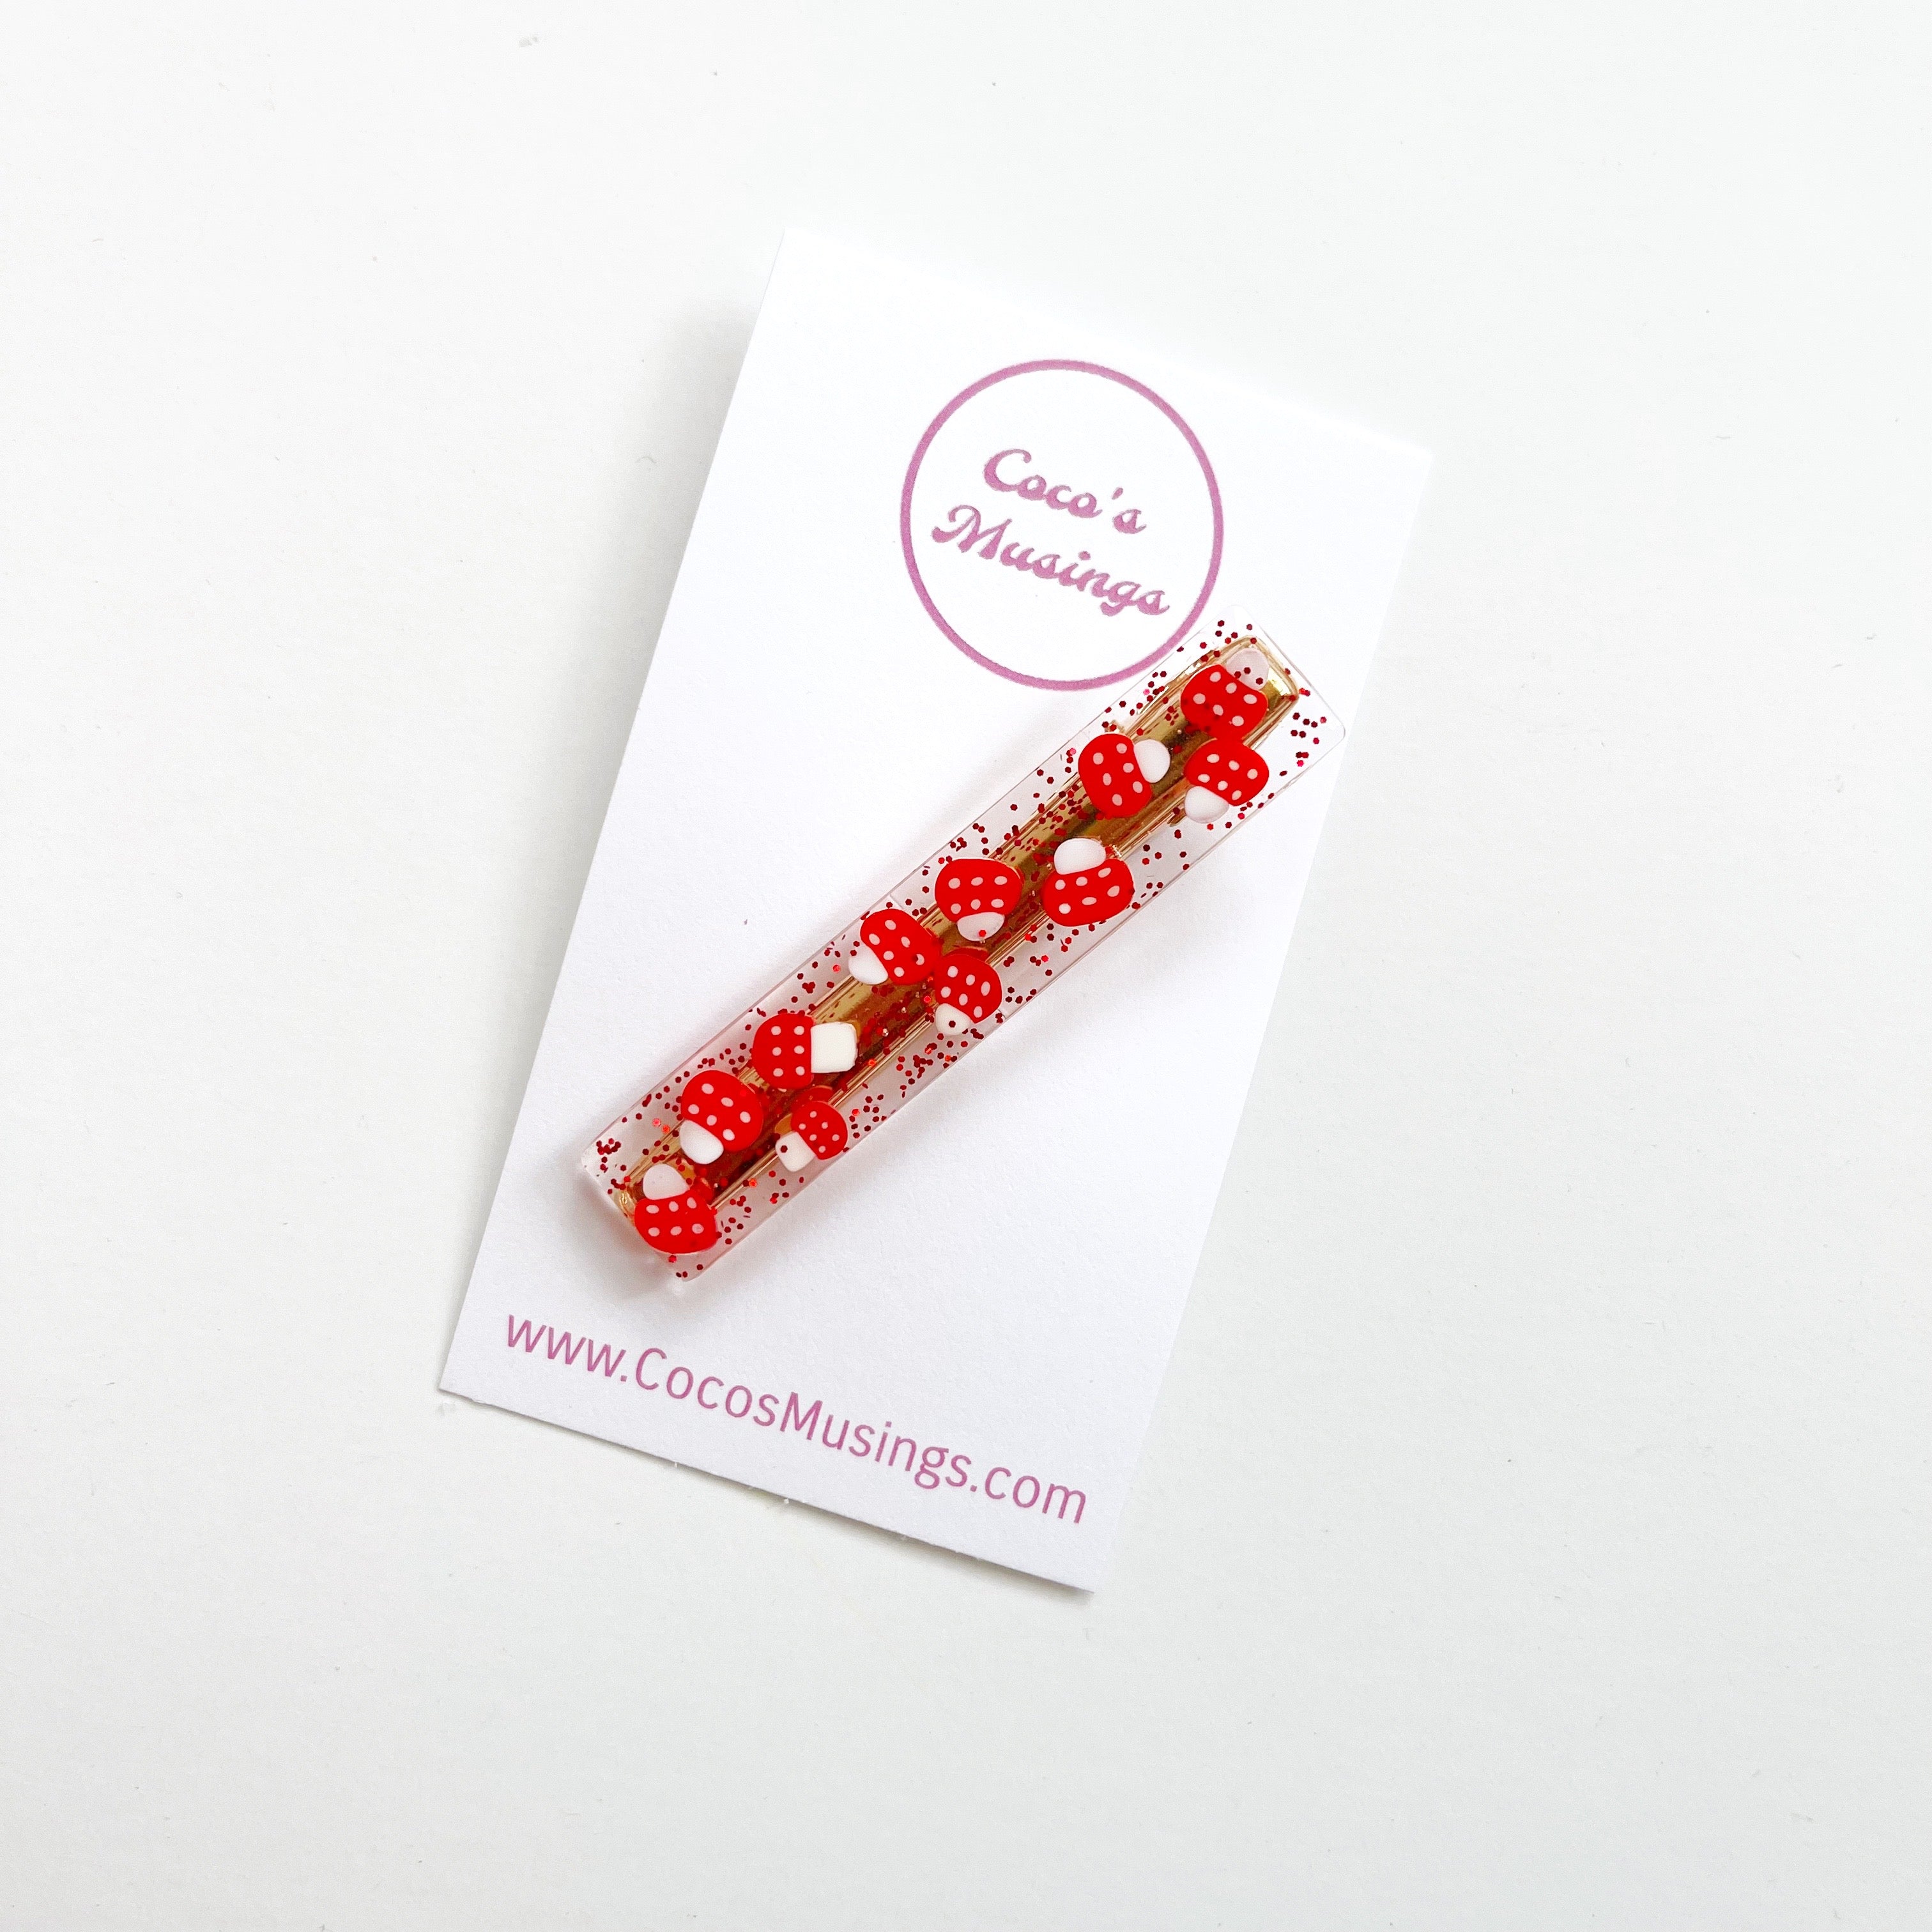 Image of clear clip with red glitter and images of red and white mushrooms rectangular hair clip.  